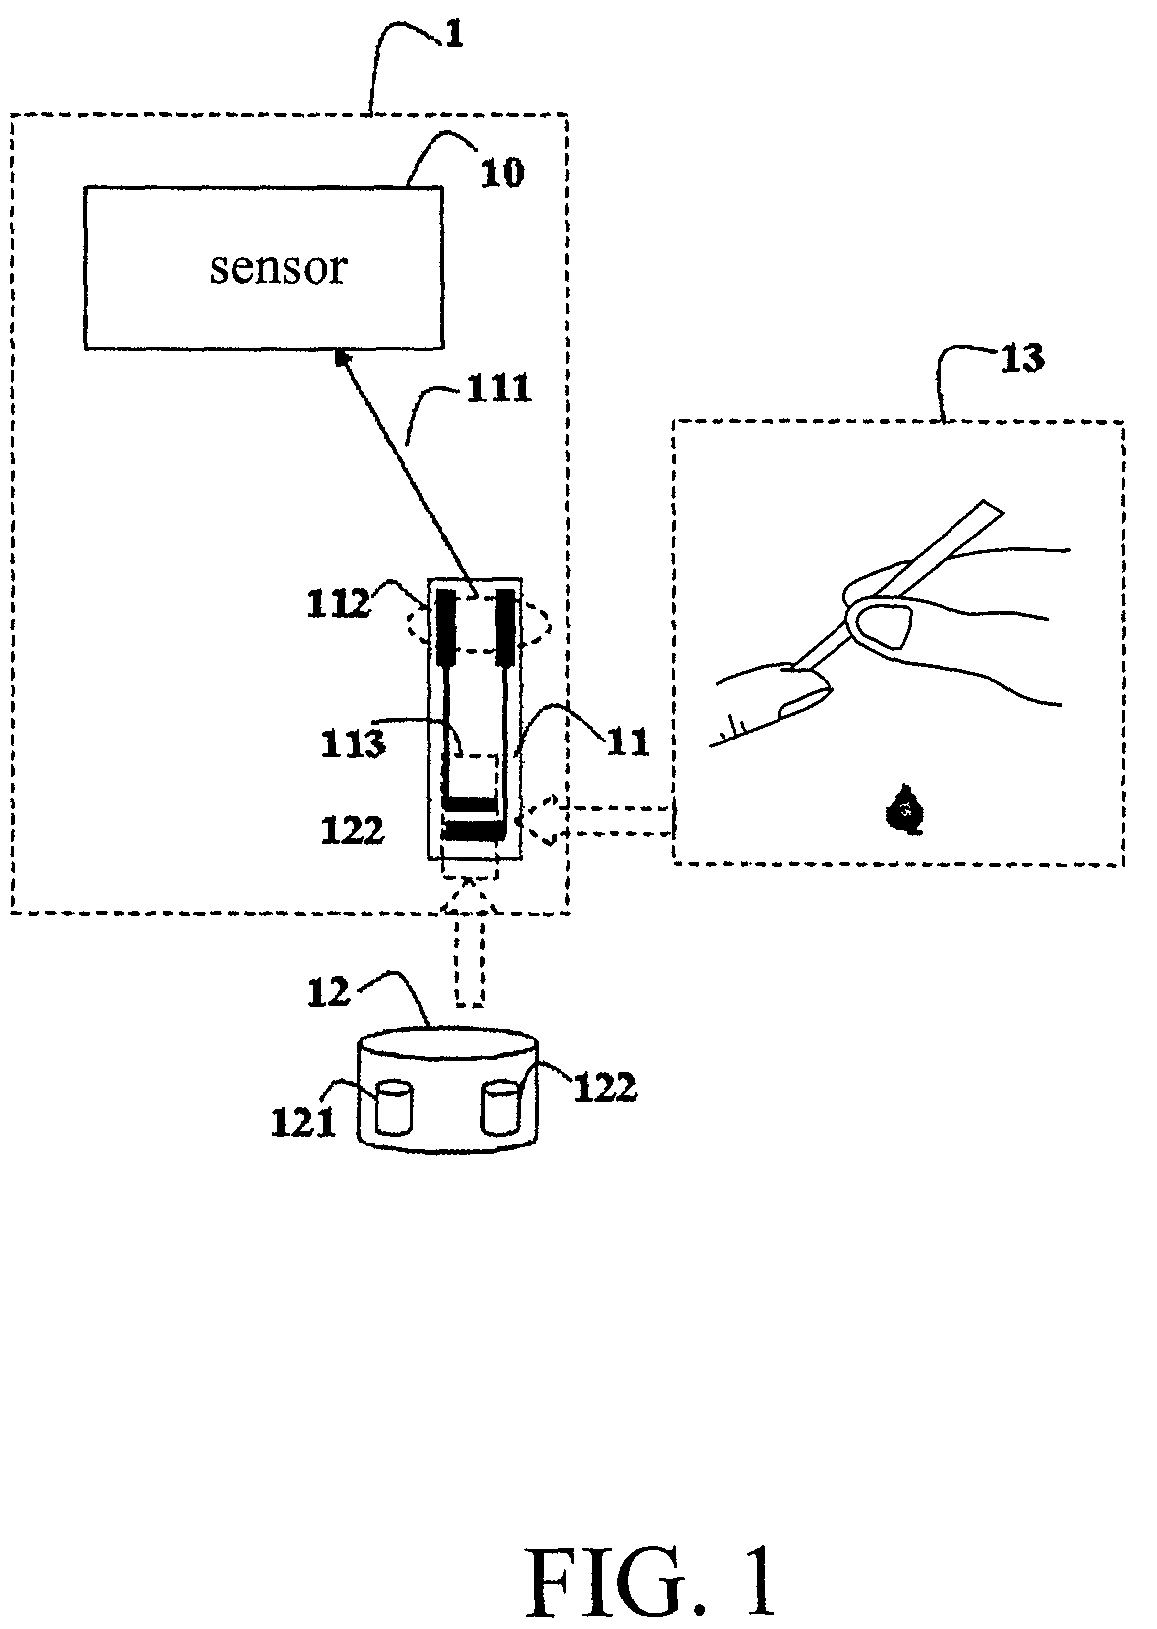 Biosensor, biostrip, and manufacture method of determination of uric acid by a non-enzymatic reagent